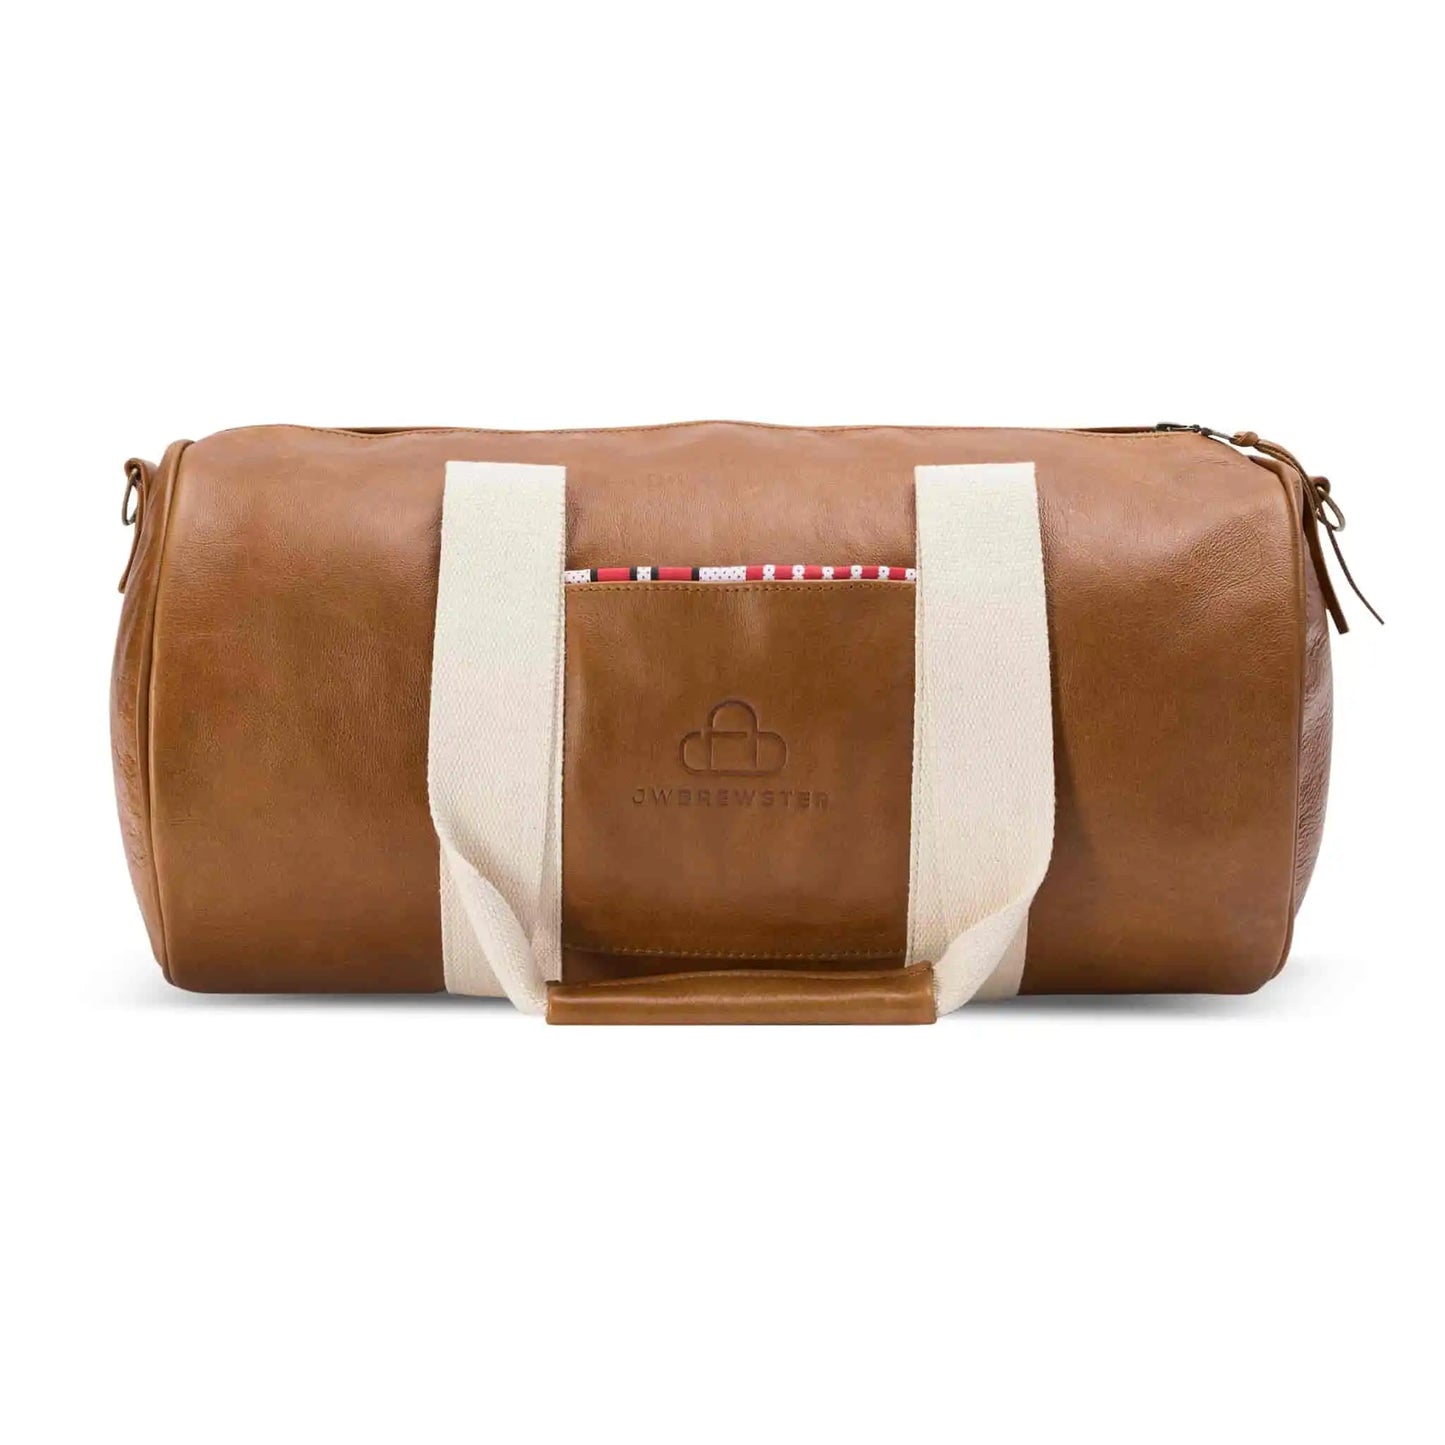 JW Brewster Leather Weekender Bags - Great for Gym or Travel